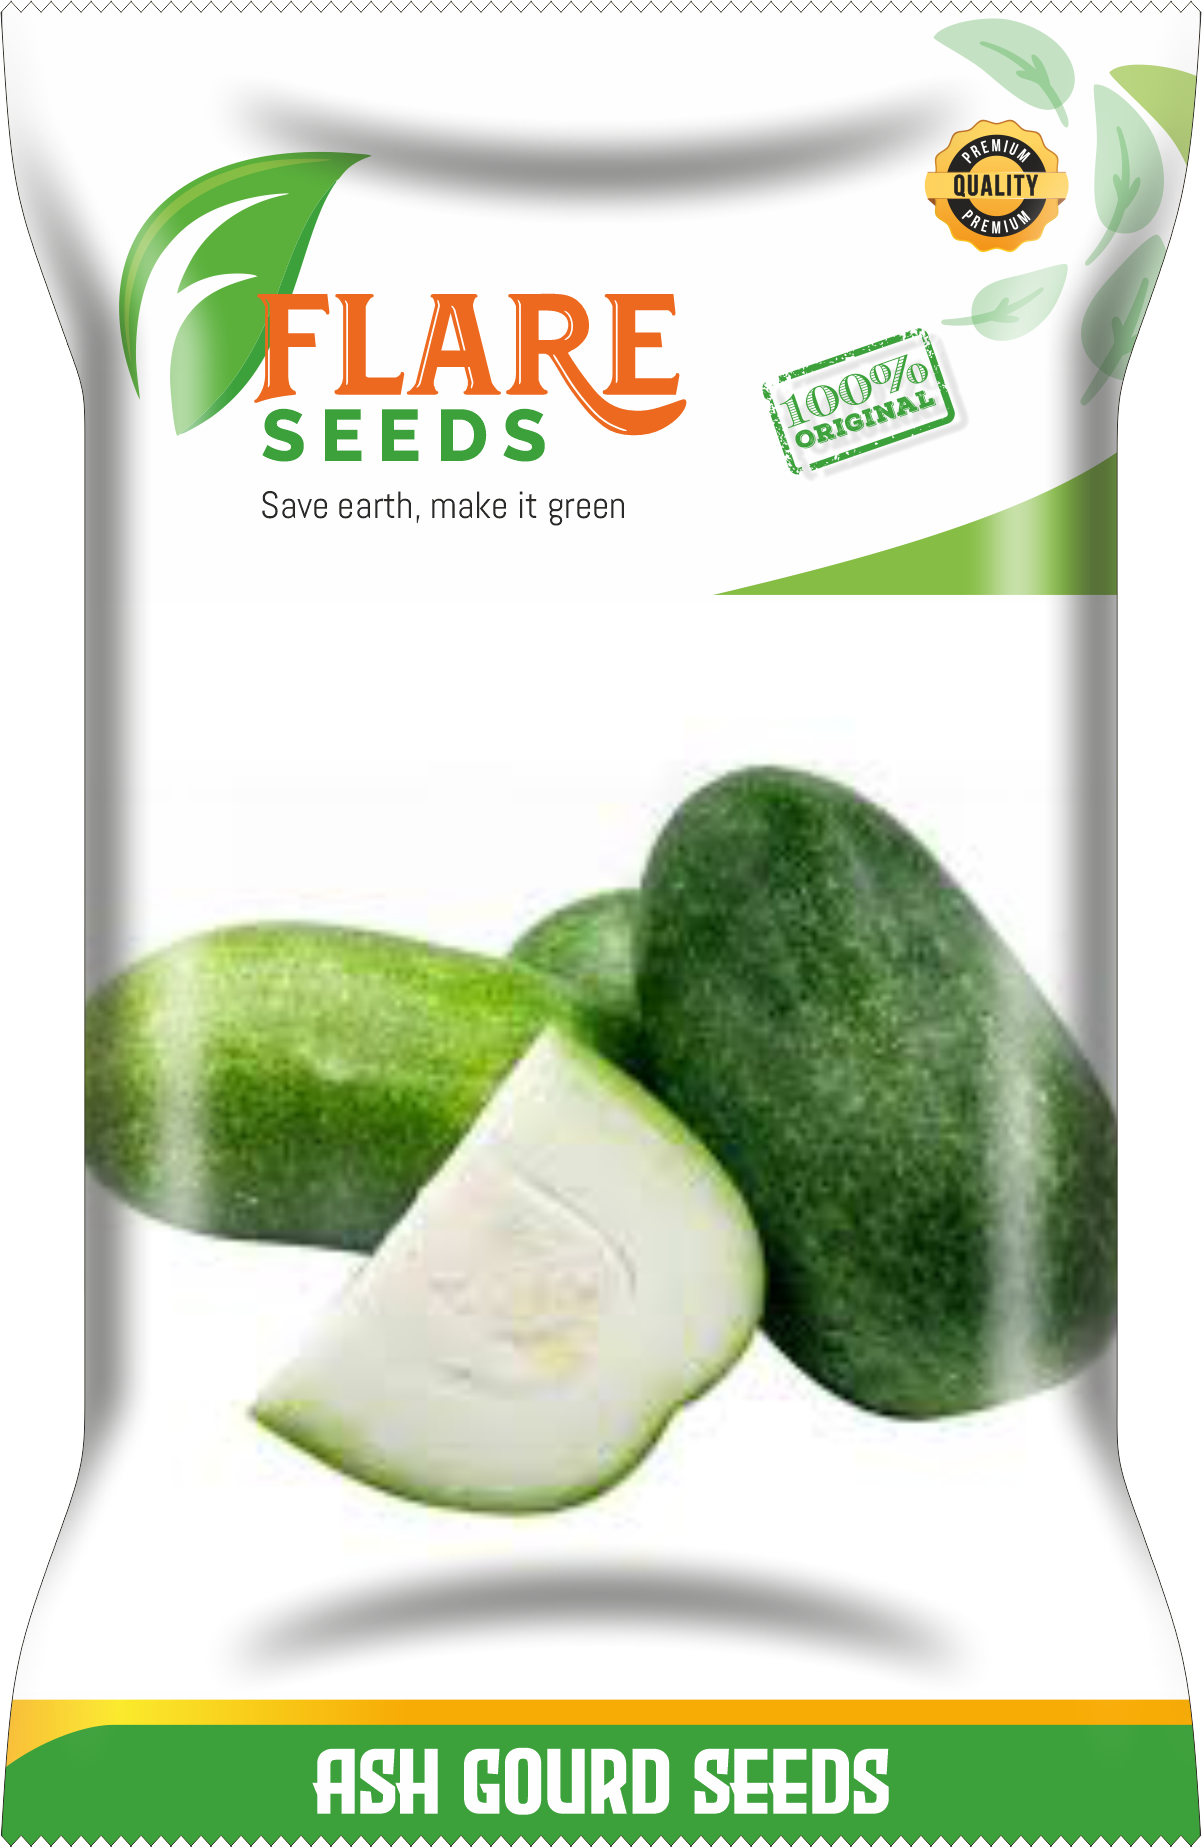 Buy ASH GOURD SEEDS - 50 SEEDS PACK Online @ ₹199 from ShopClues